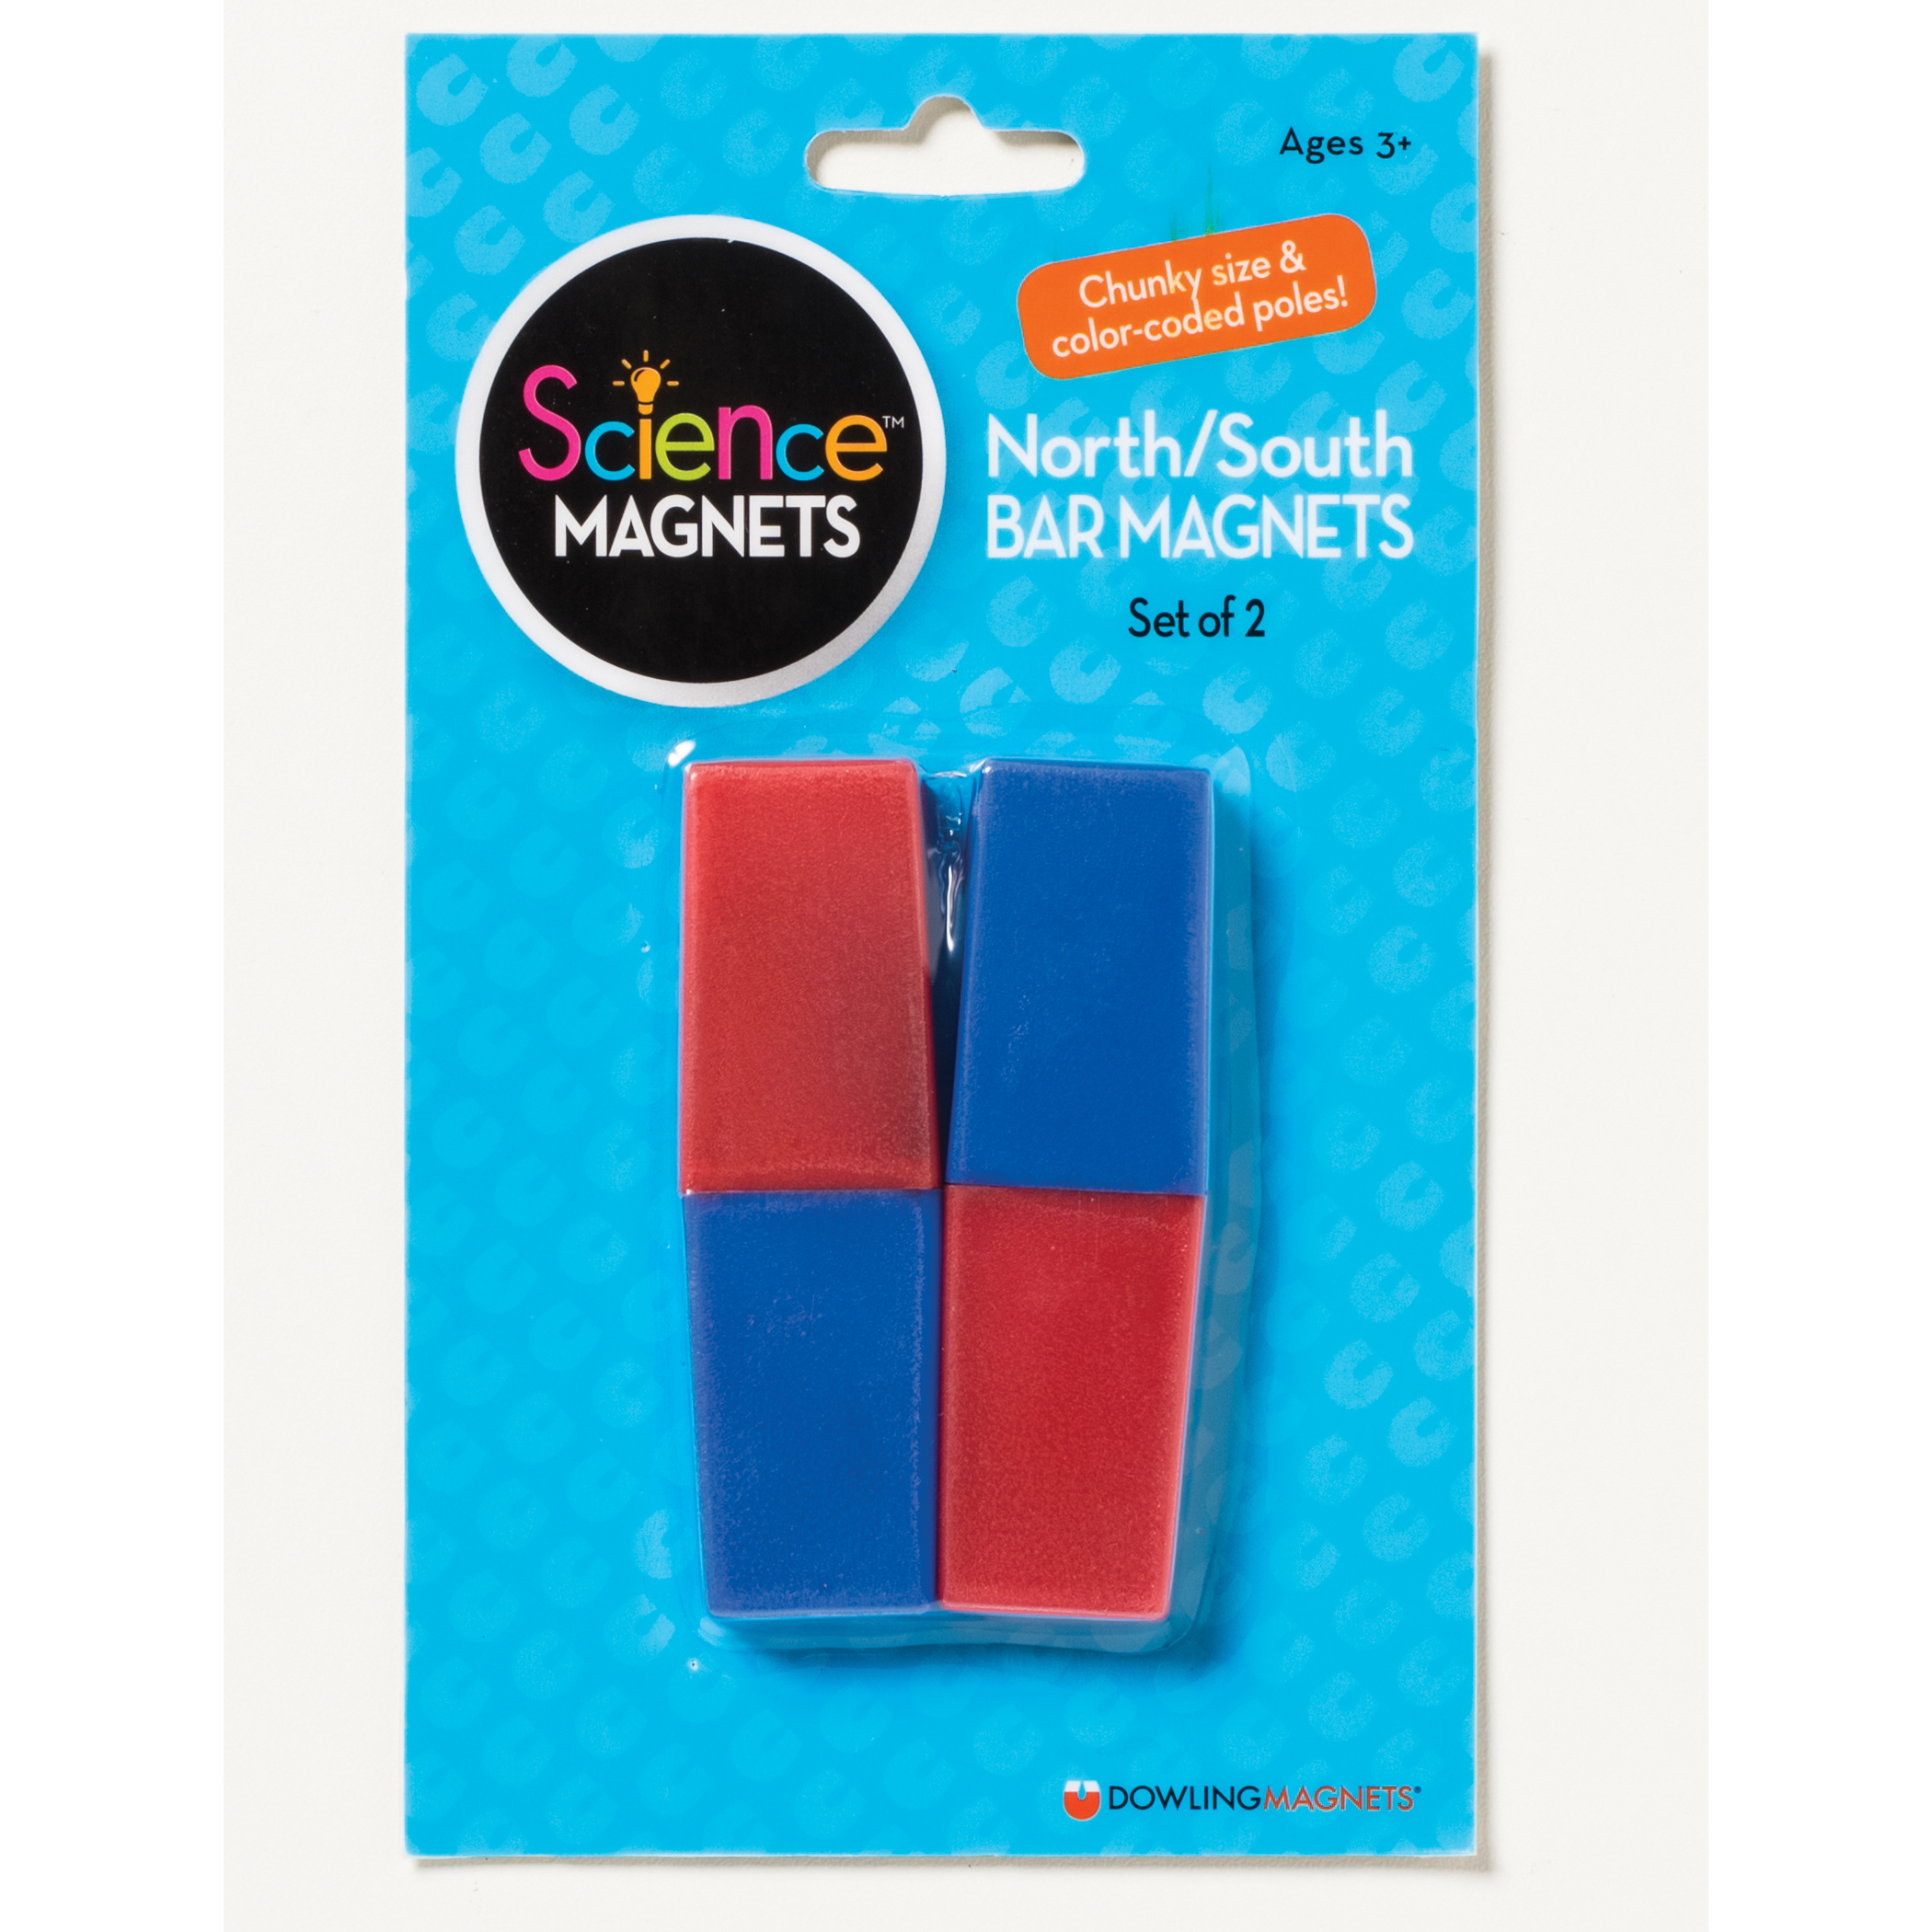 North/South Bar Magnets 3, Red/Blue Poles, Pack of 2 - DO-712